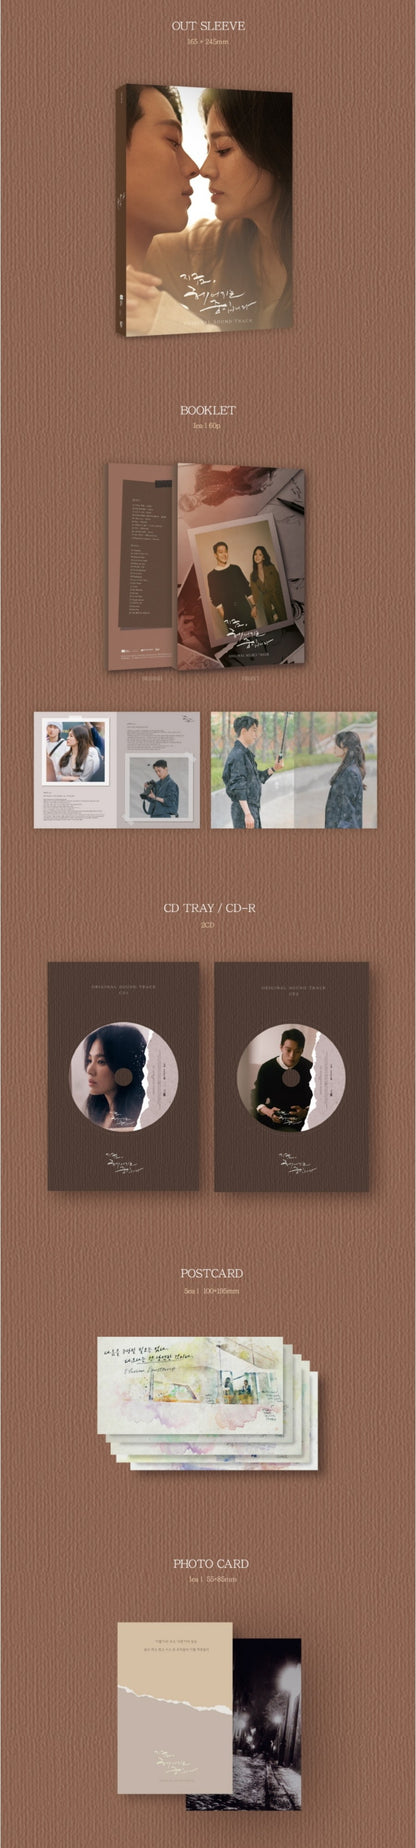 [PREORDER] NOW, WE ARE BREAKING UP O.S.T - SBS DRAMA (2CD)